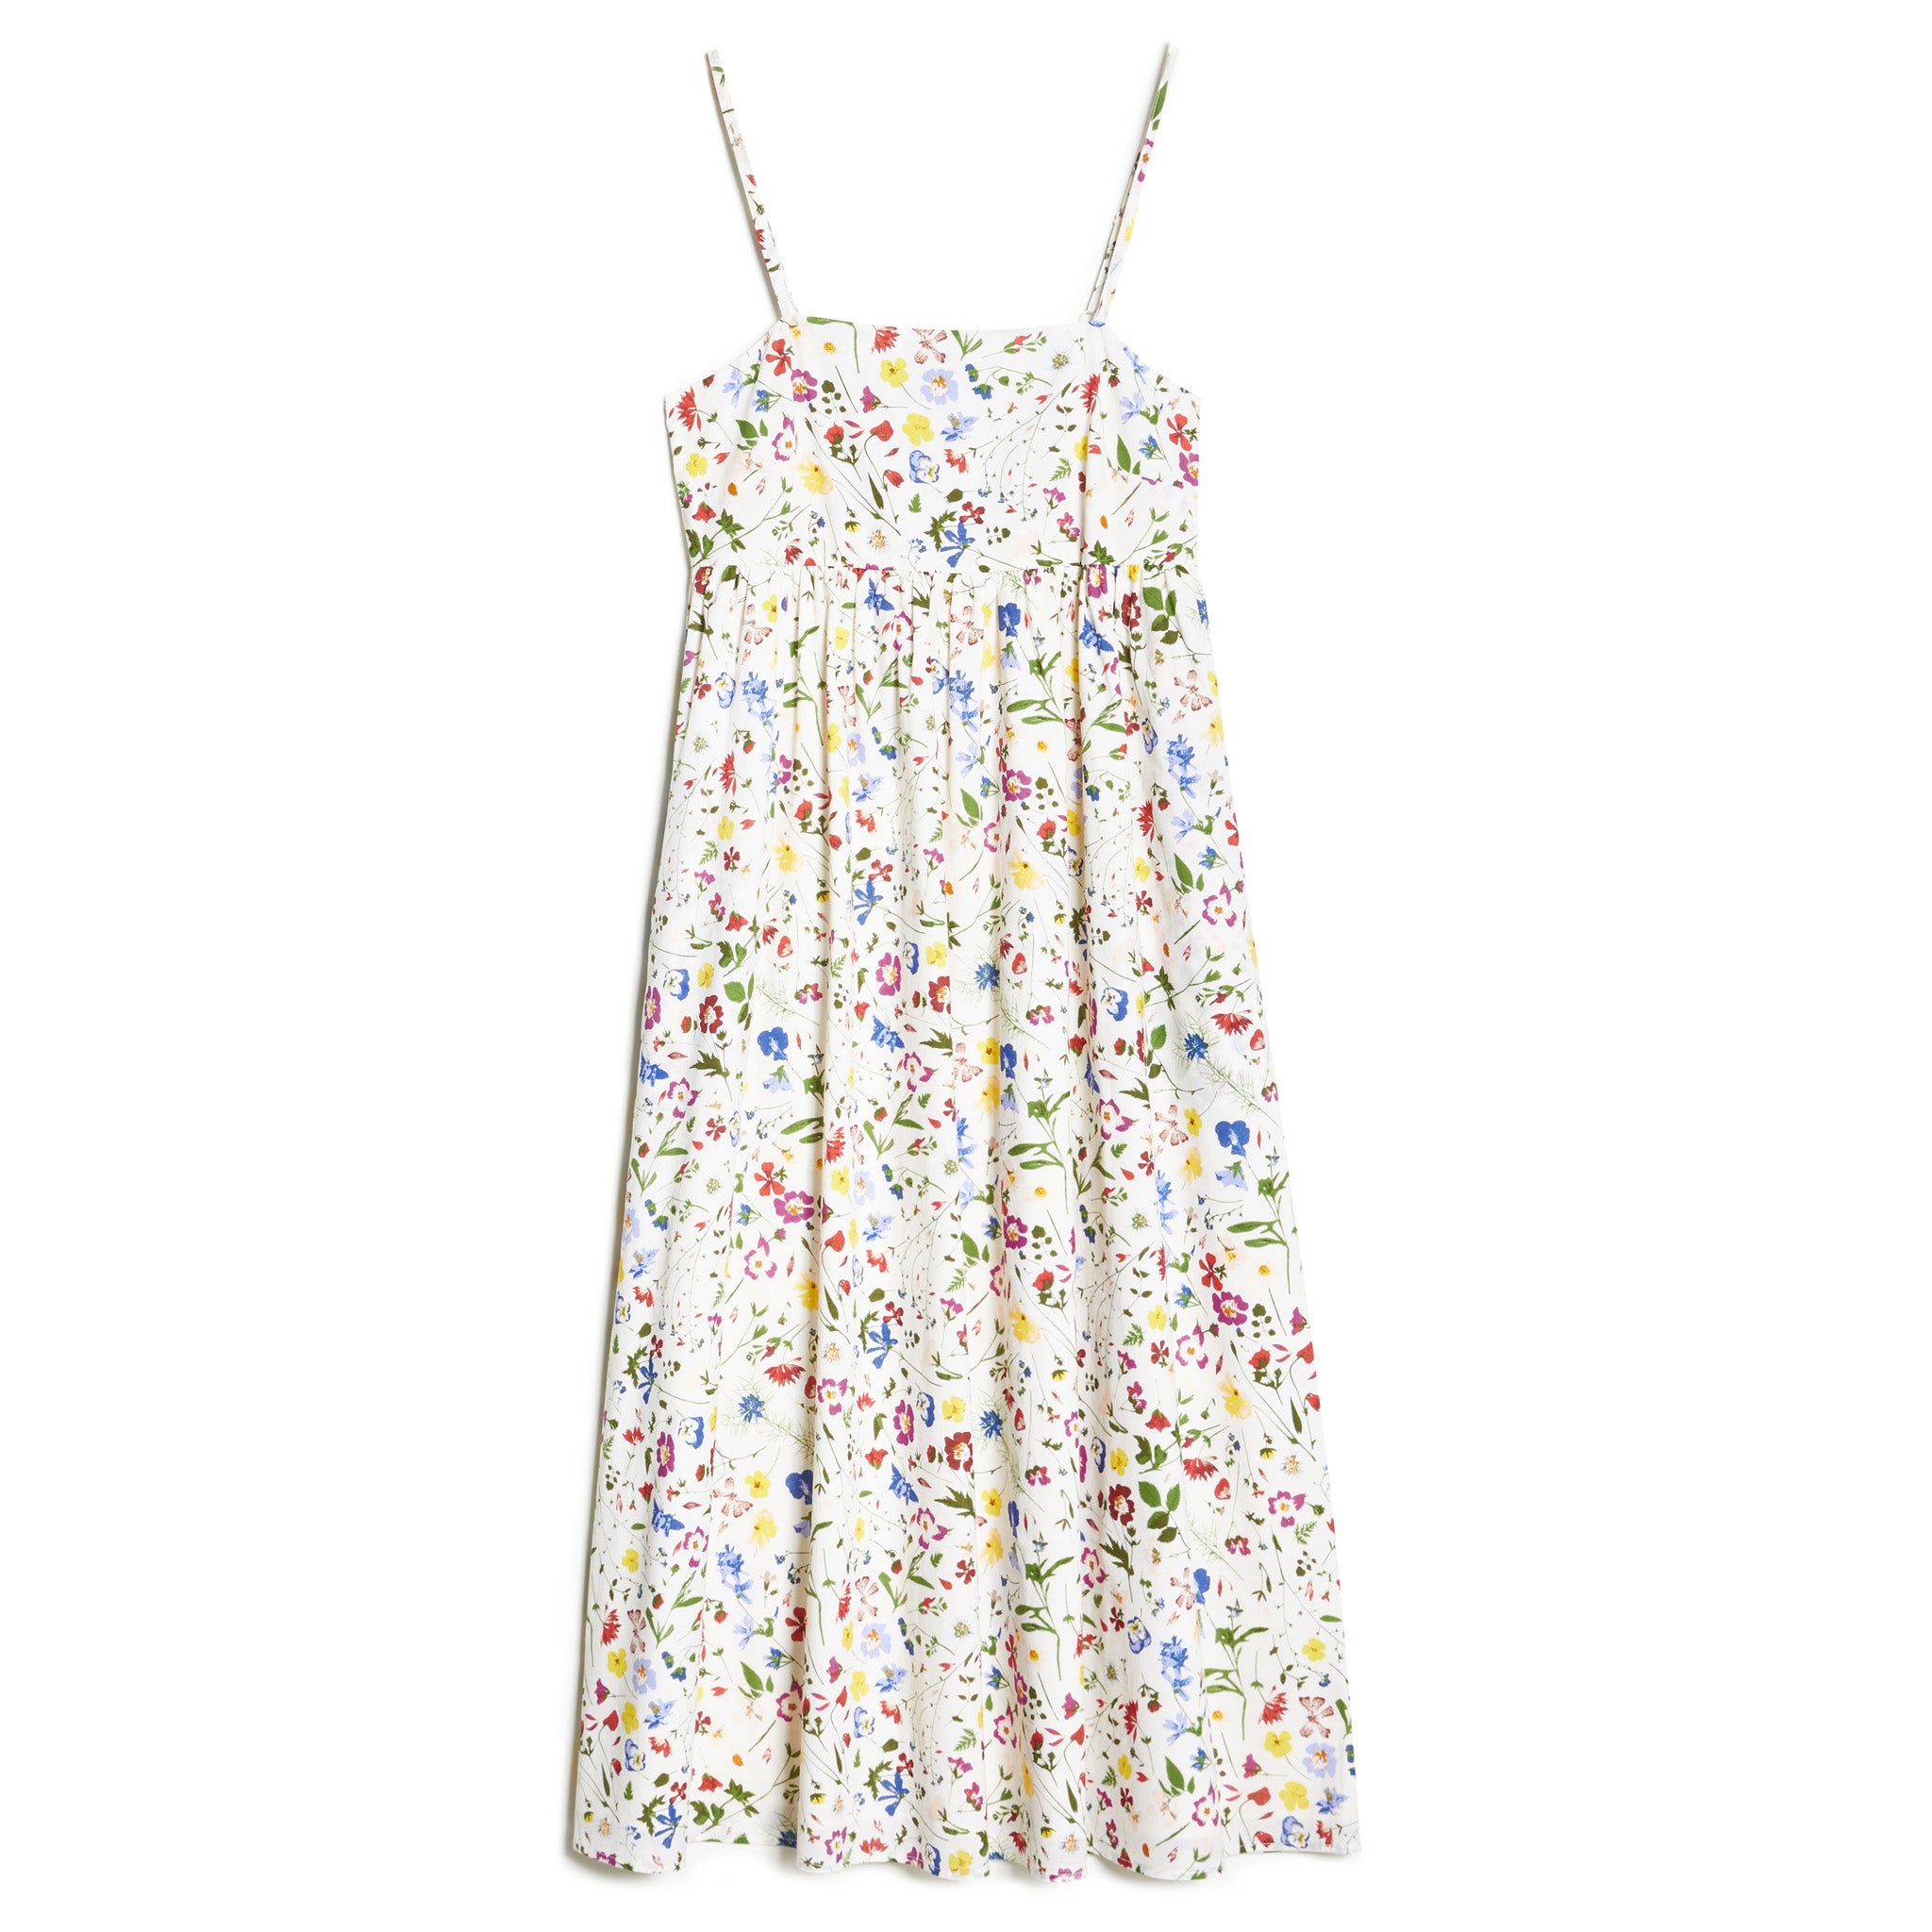 Buttercup Pressed Floral Sundress